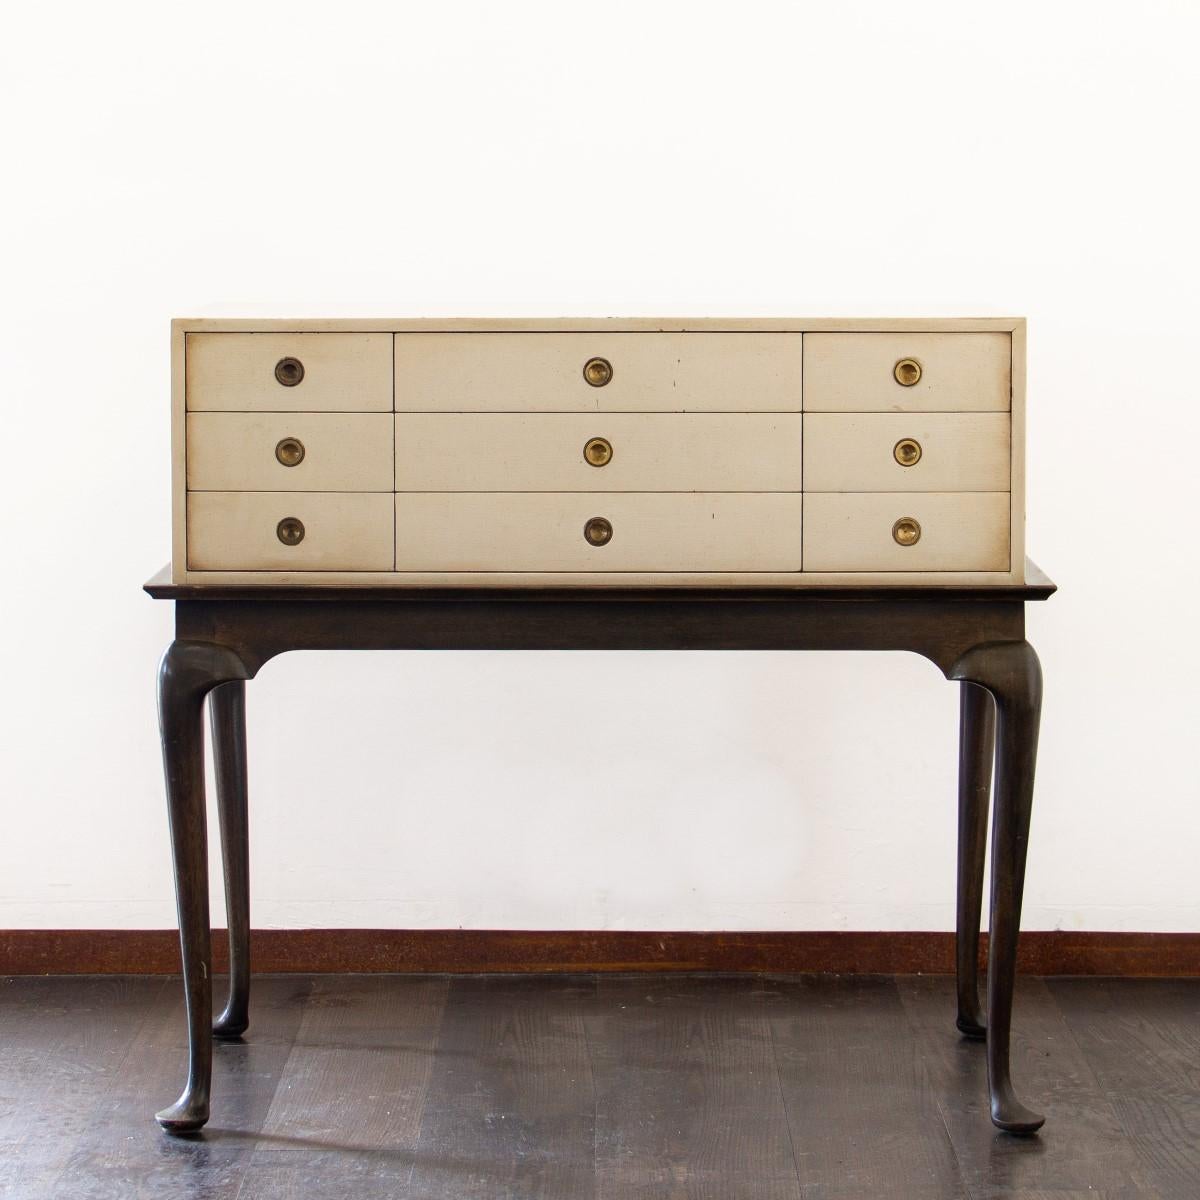 An oyster colored, twelve-drawer cabinet, set on dark wooden, raised cabriole legs. The drawers are furnished with round brass ring pull handles and the interior of the drawer is embossed with makers mark, designed by Kittinger, 1950s.

The